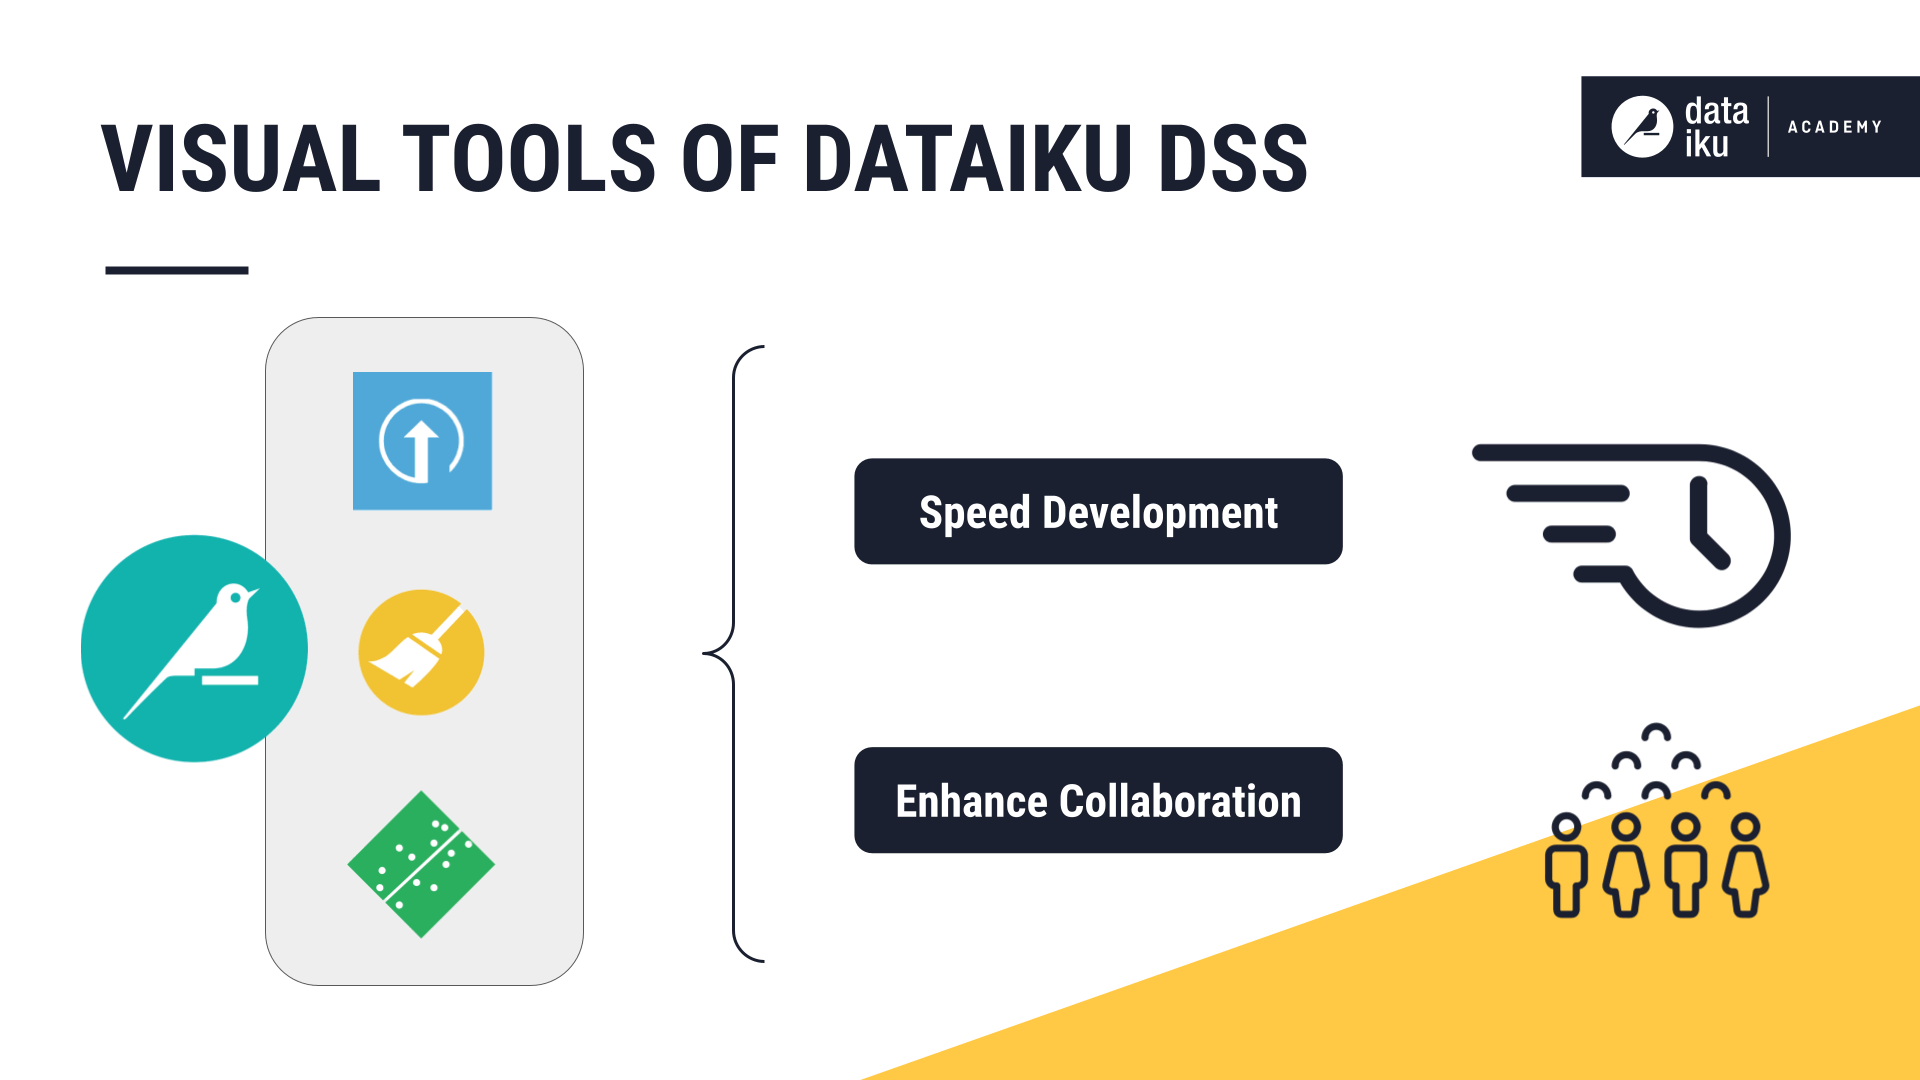 A slide recapping the value of visual tools in Dataiku.